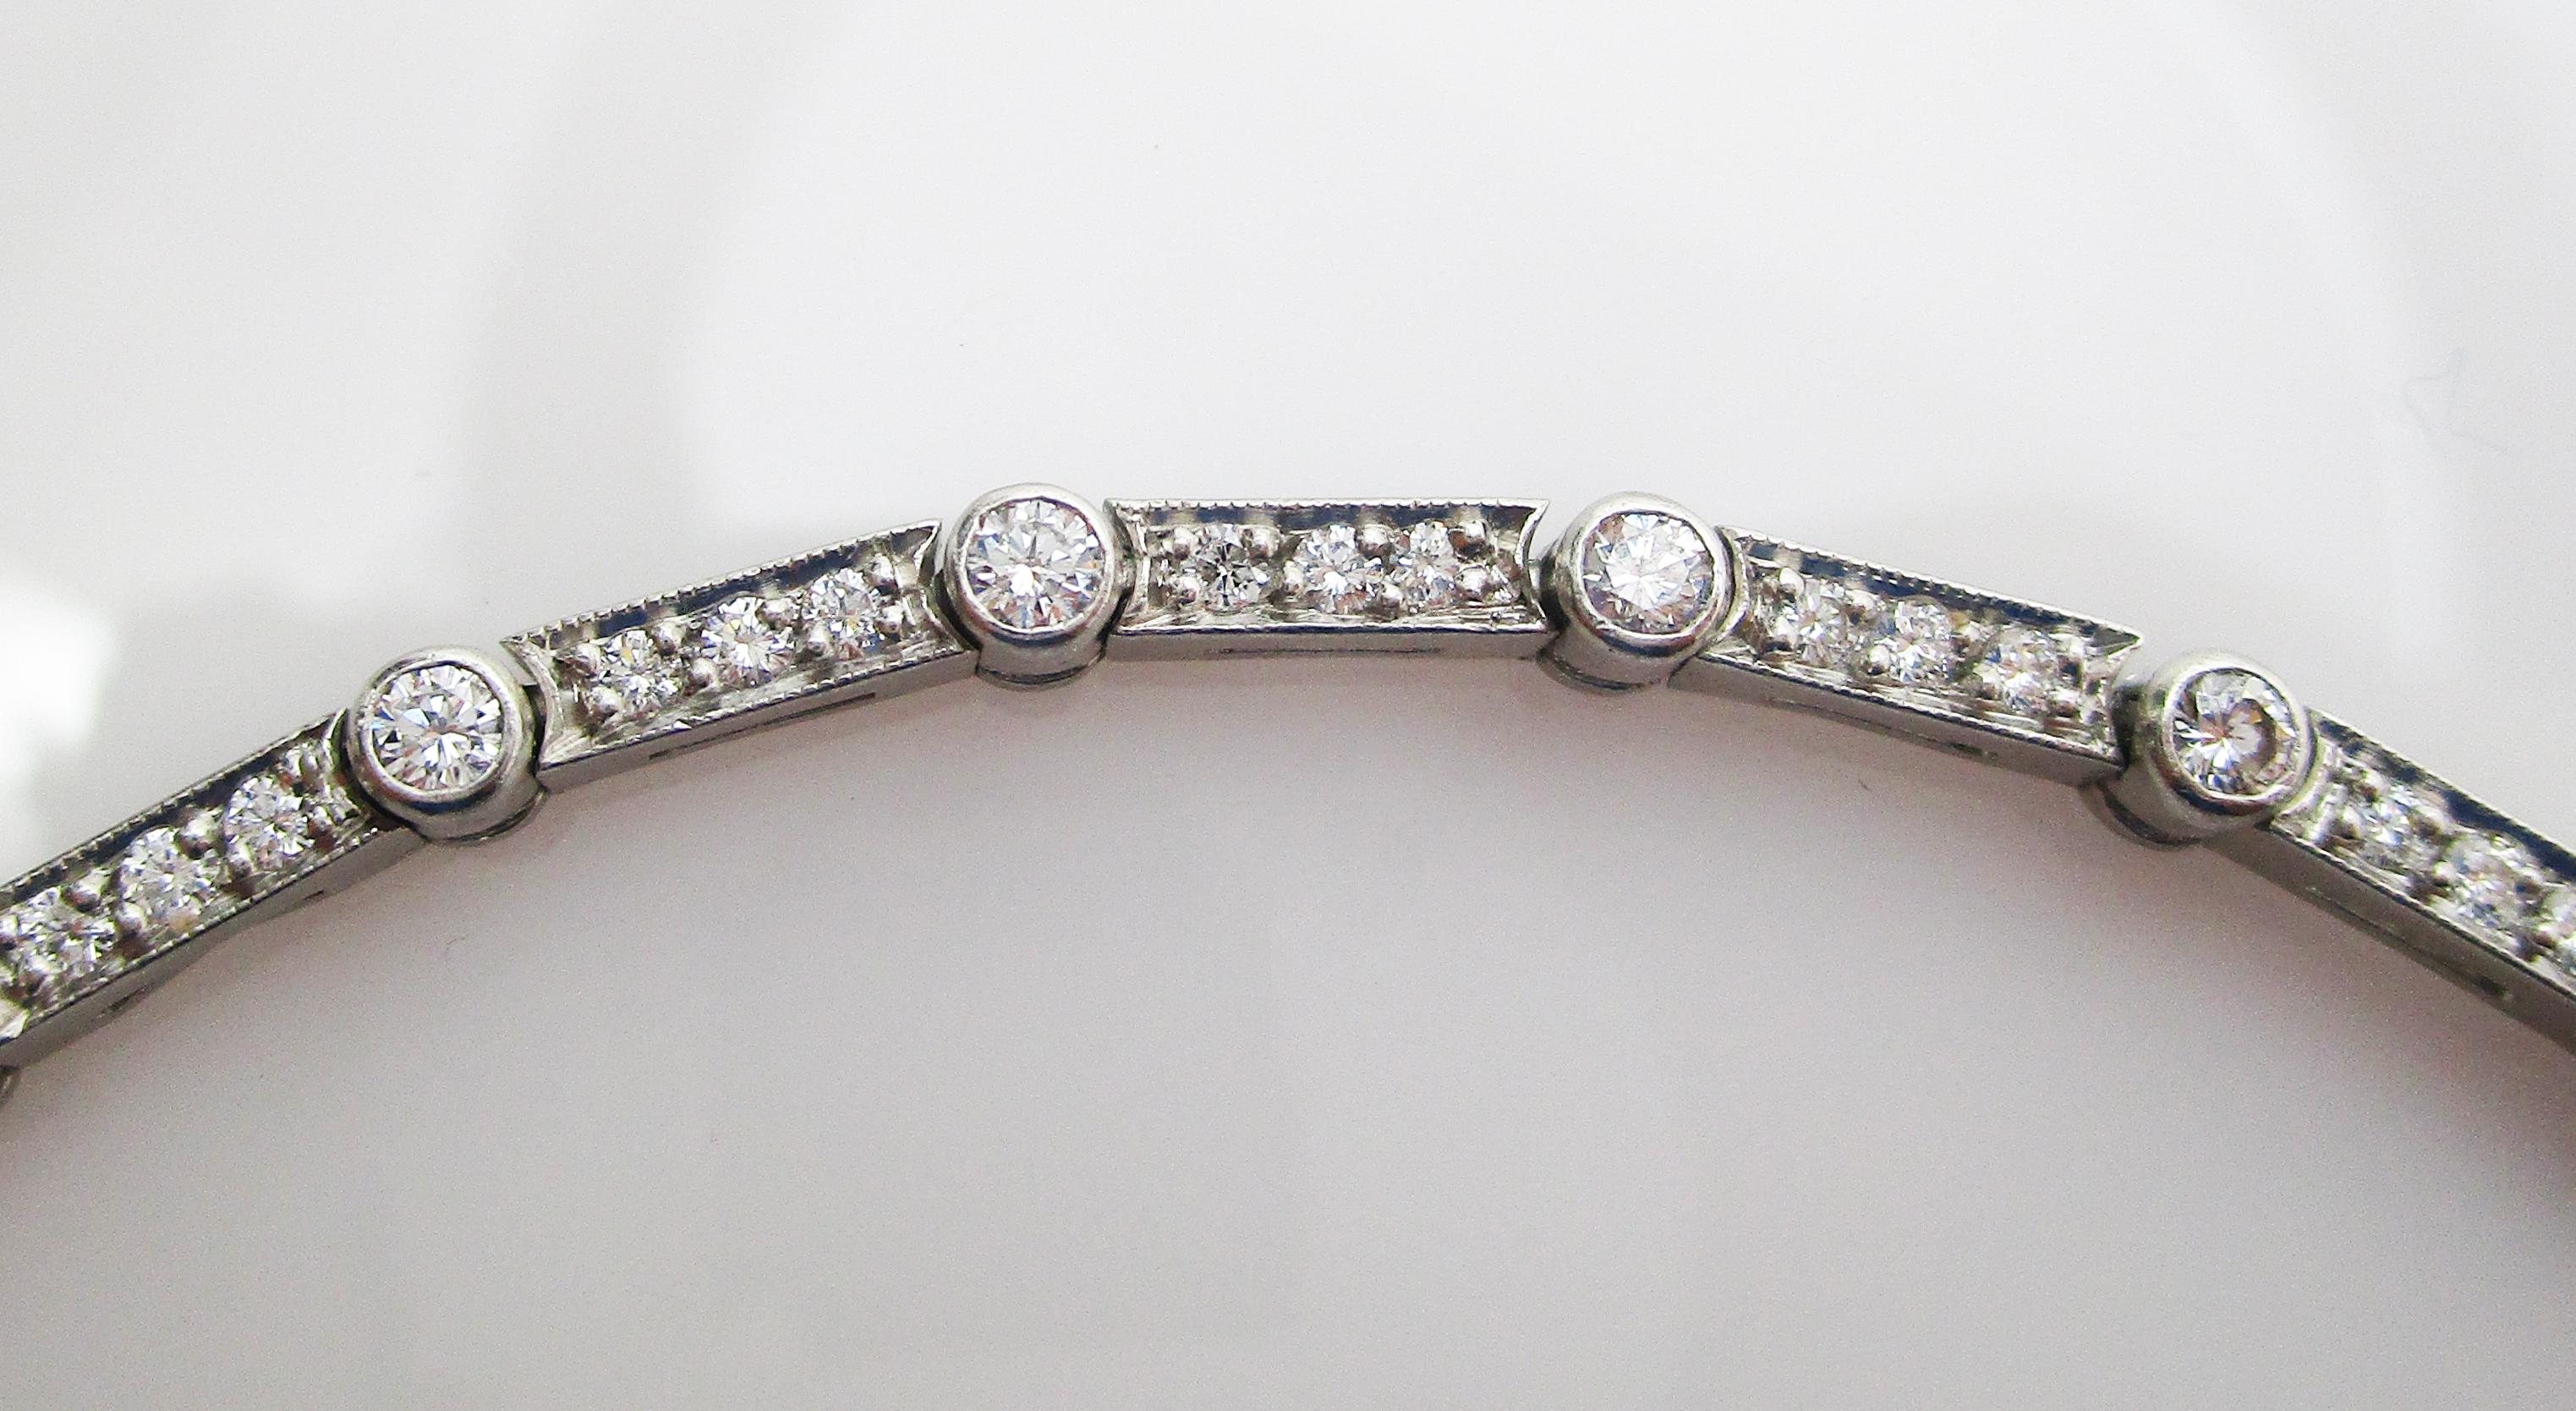 This is a gorgeous Deco style platinum line bracelet with an array of beautiful white diamonds! This unique bracelet has an alternating pattern of round and rectangular links, each set with bright white diamonds. This layout makes the bracelet